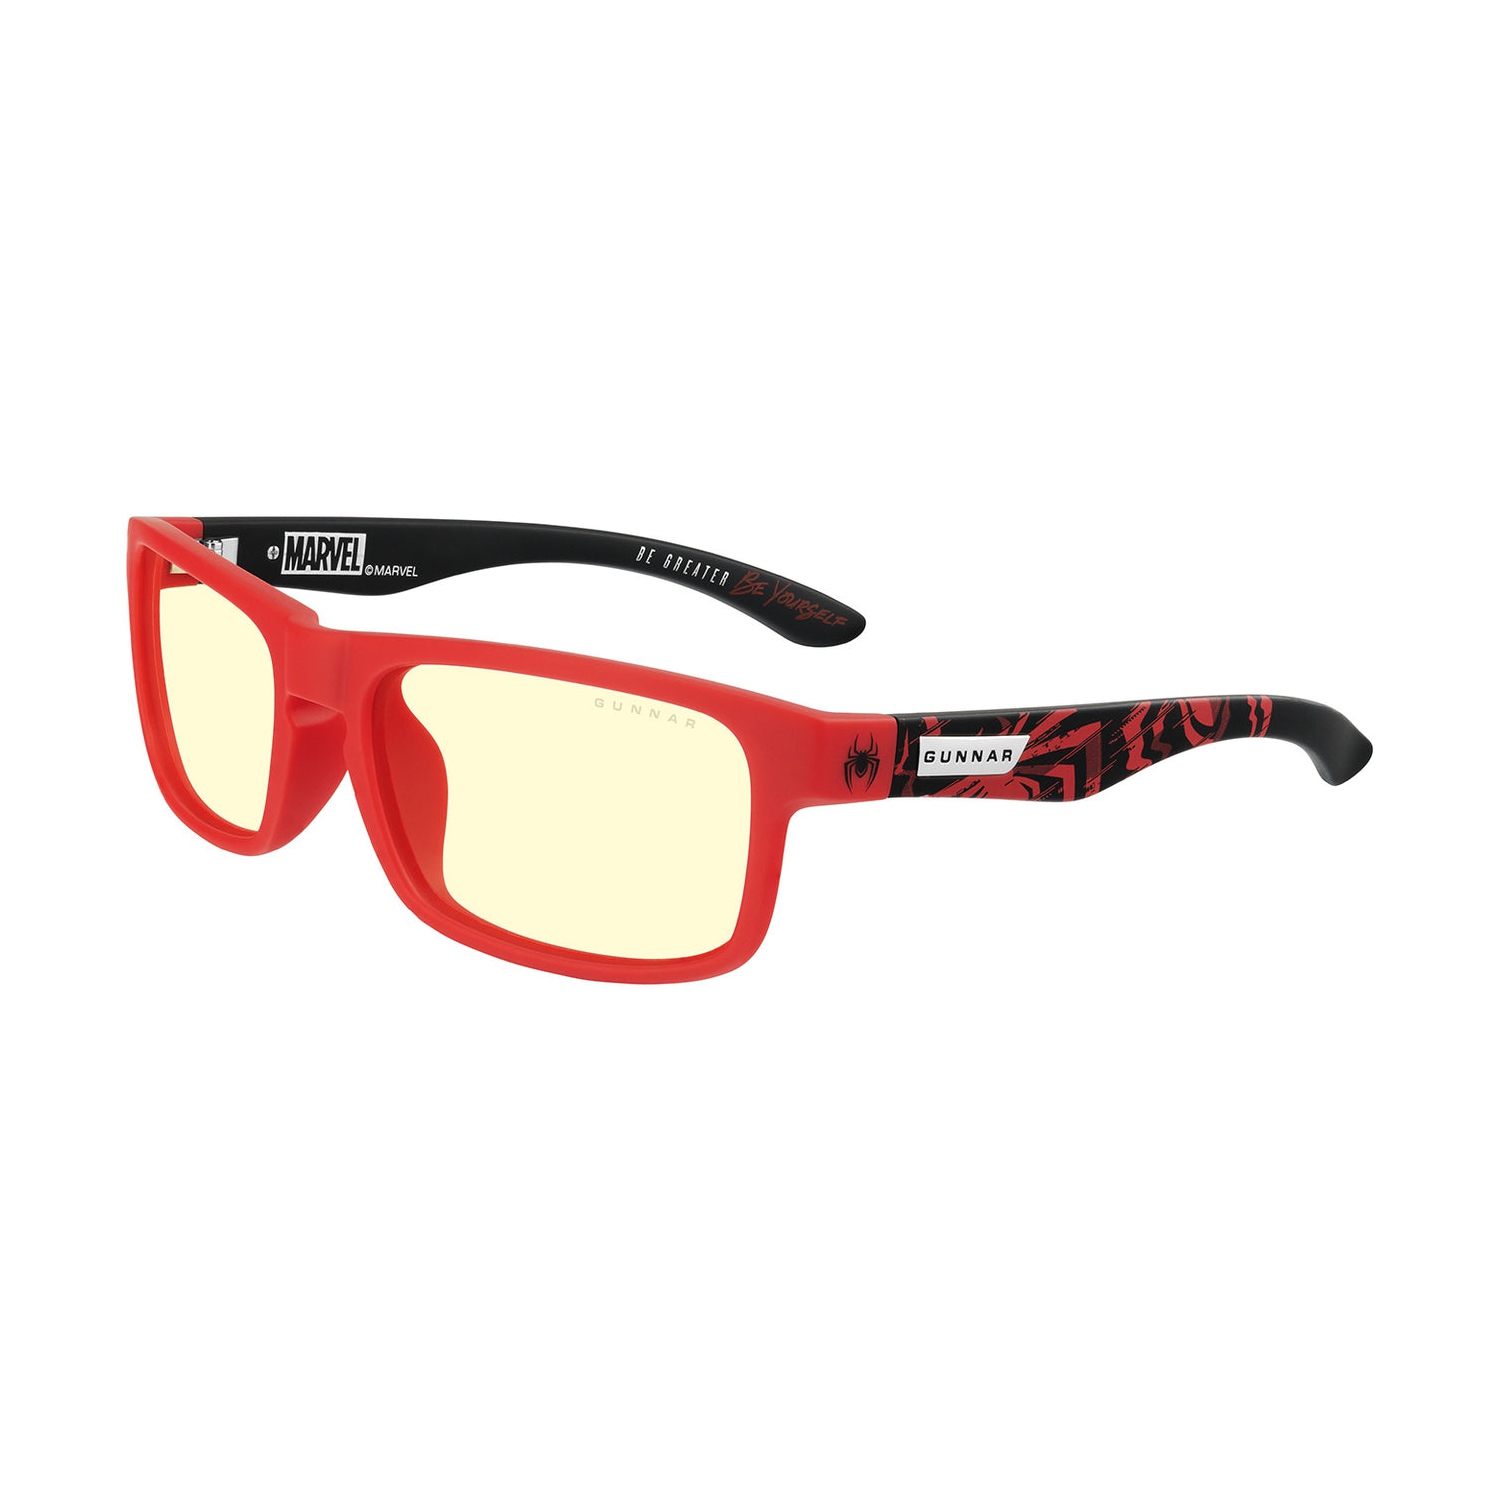 Gunnar Blue Light Glasses, Enigma, Marvel Spider-Man Miles Morales Edition, with GUNNAR-Focus, Amber Lens, 65% Blue Light and 100% UV Protection